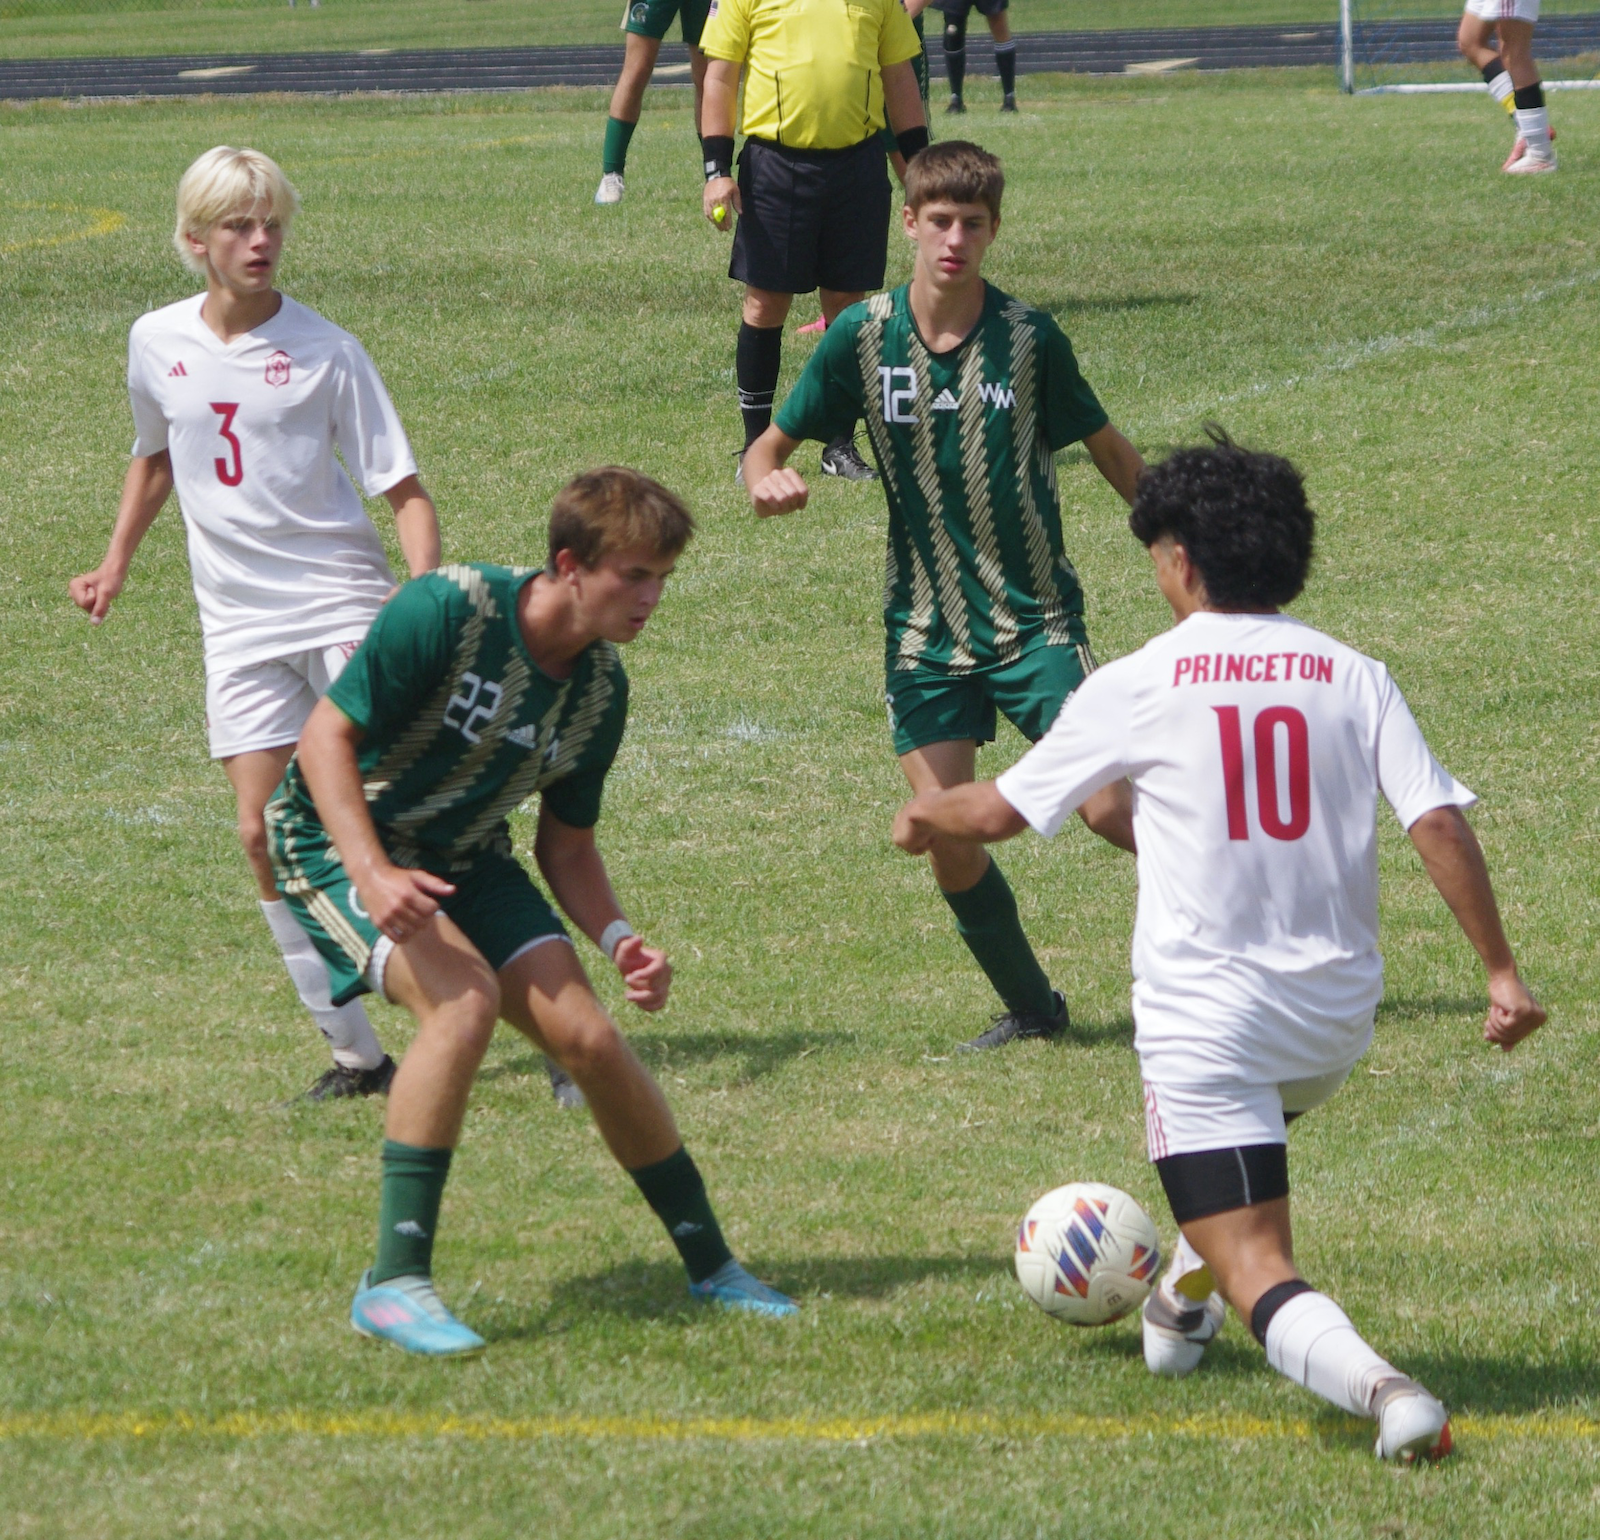 Boys Soccer gallery cover photo